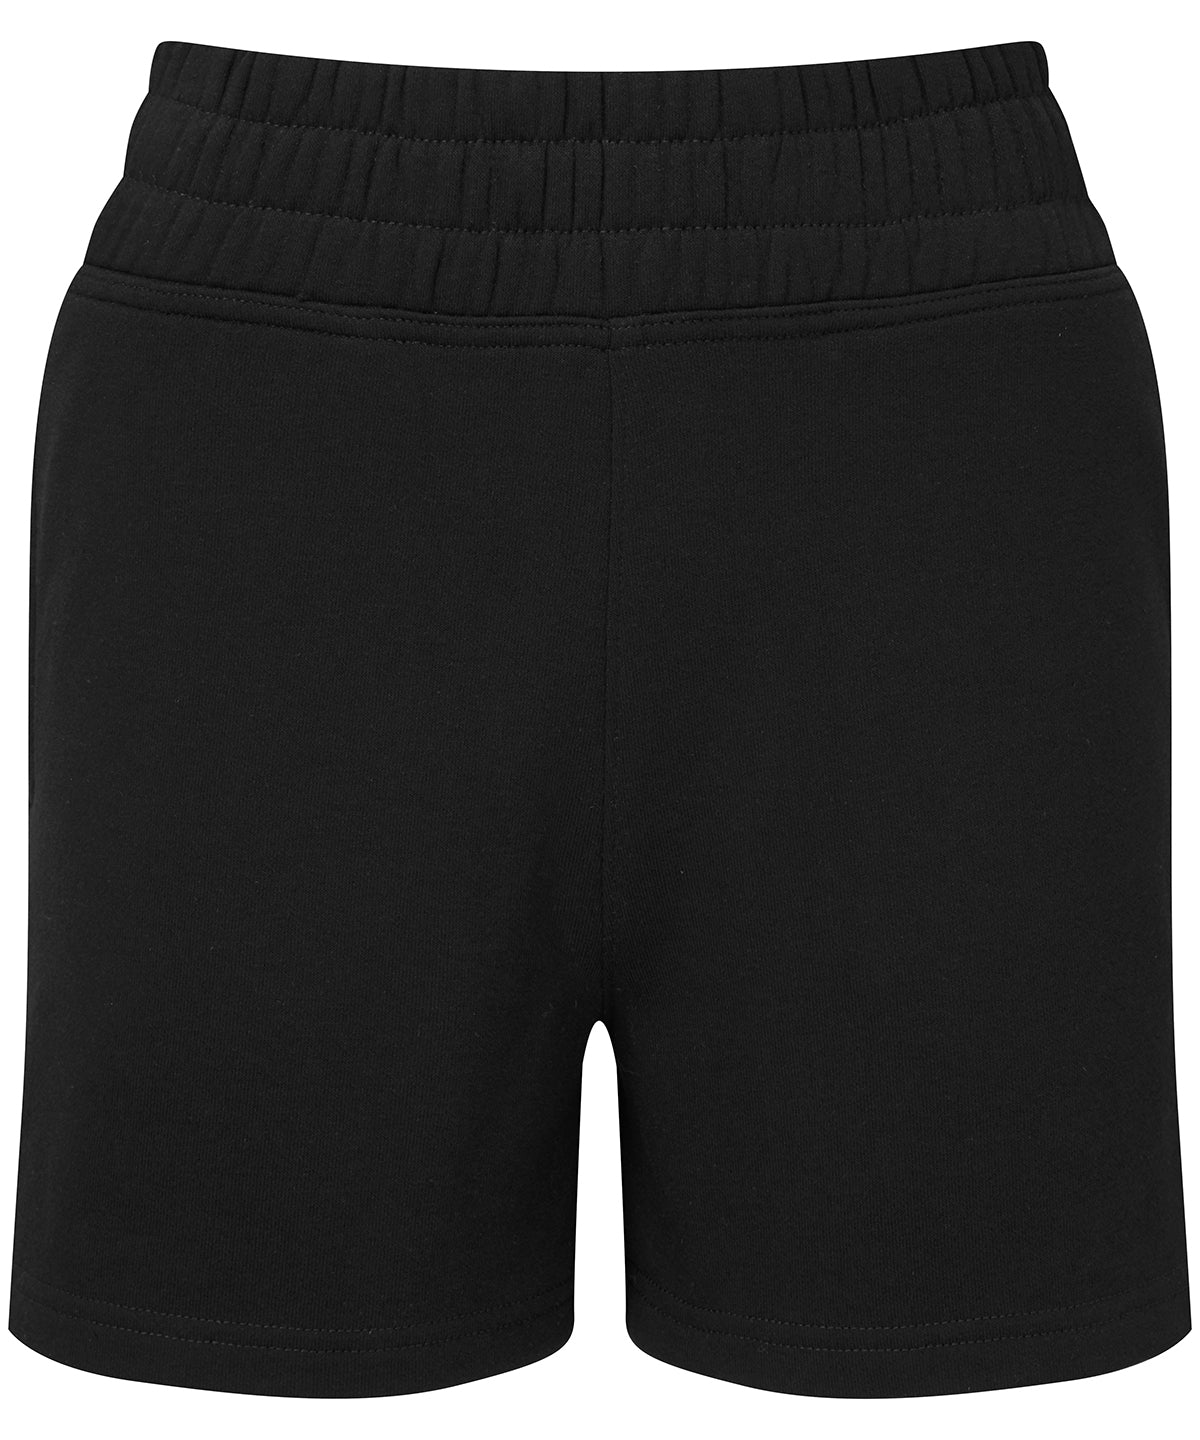 Black - Women's TriDri® jogger shorts Shorts TriDri® Co-ords, Everyday Essentials, Exclusives, Must Haves, New For 2021, New In Autumn Winter, New In Mid Year, Street Casual, Streetwear, Tracksuits, Trousers & Shorts, Women's Fashion, Working From Home Schoolwear Centres